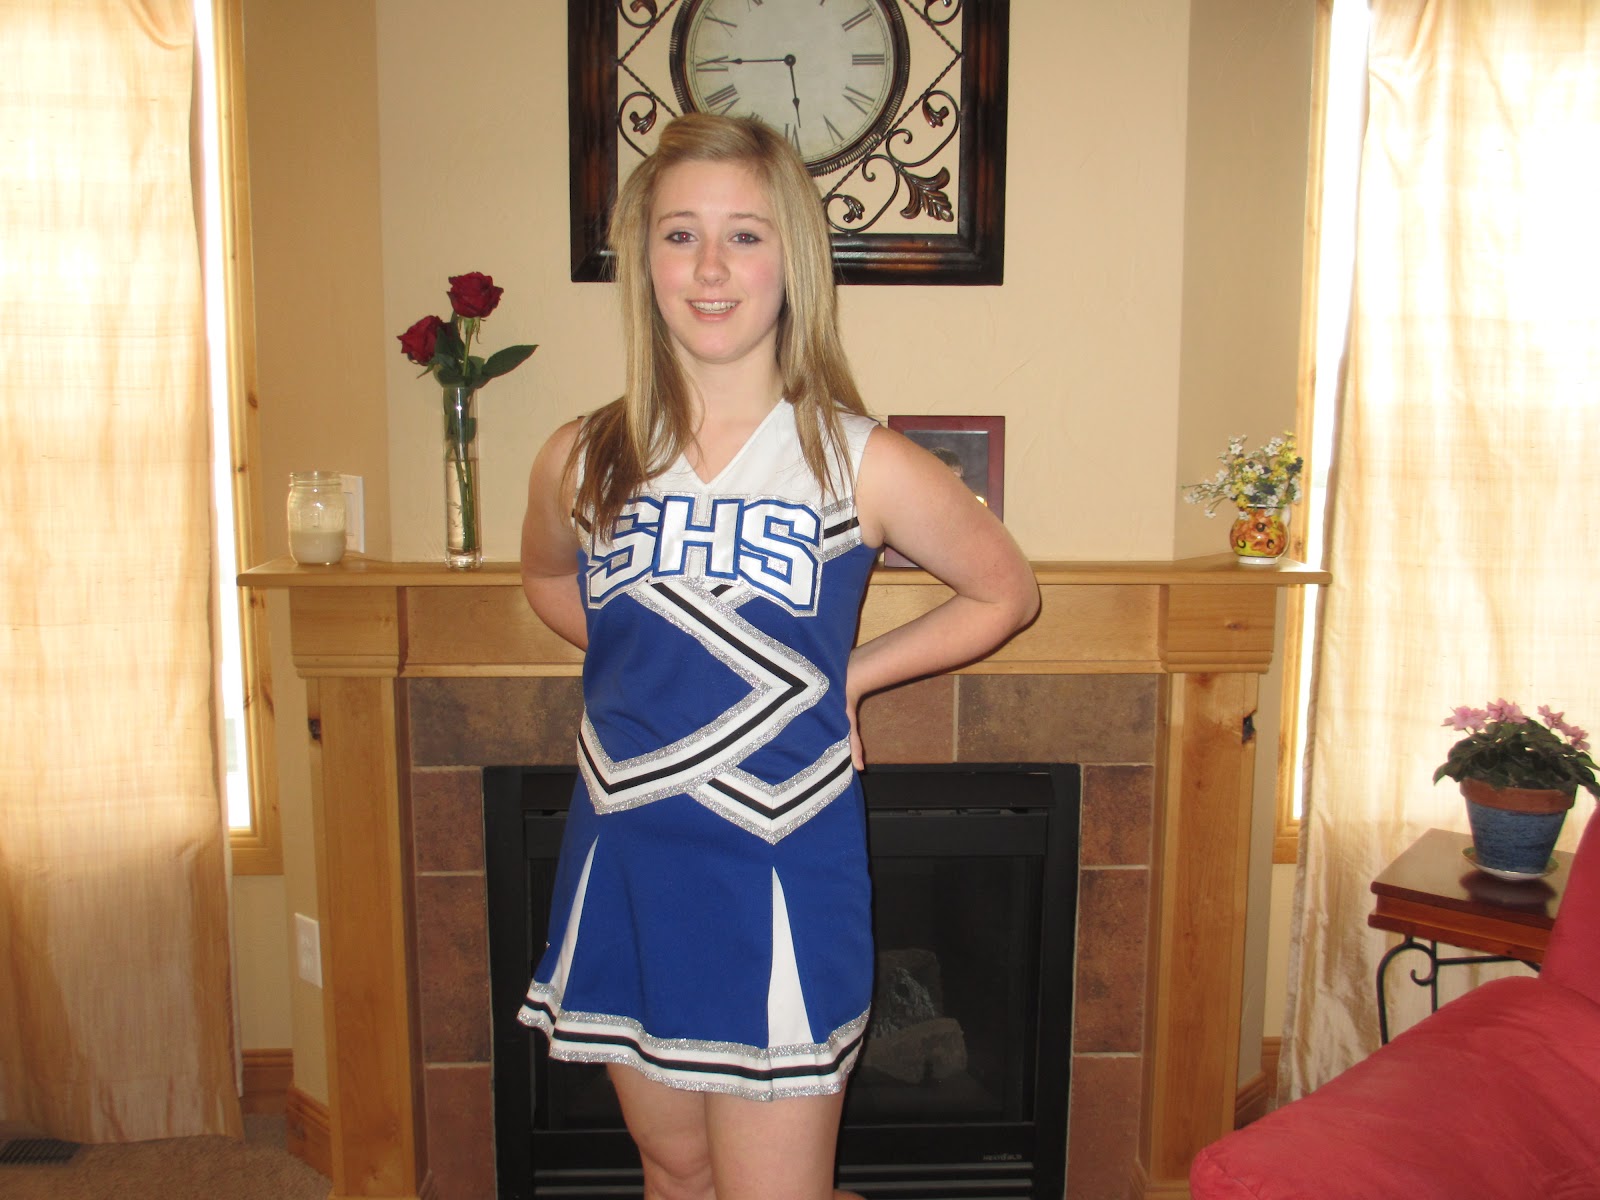 News From Laggeland Finally A Cheer Uniform Of Her Own